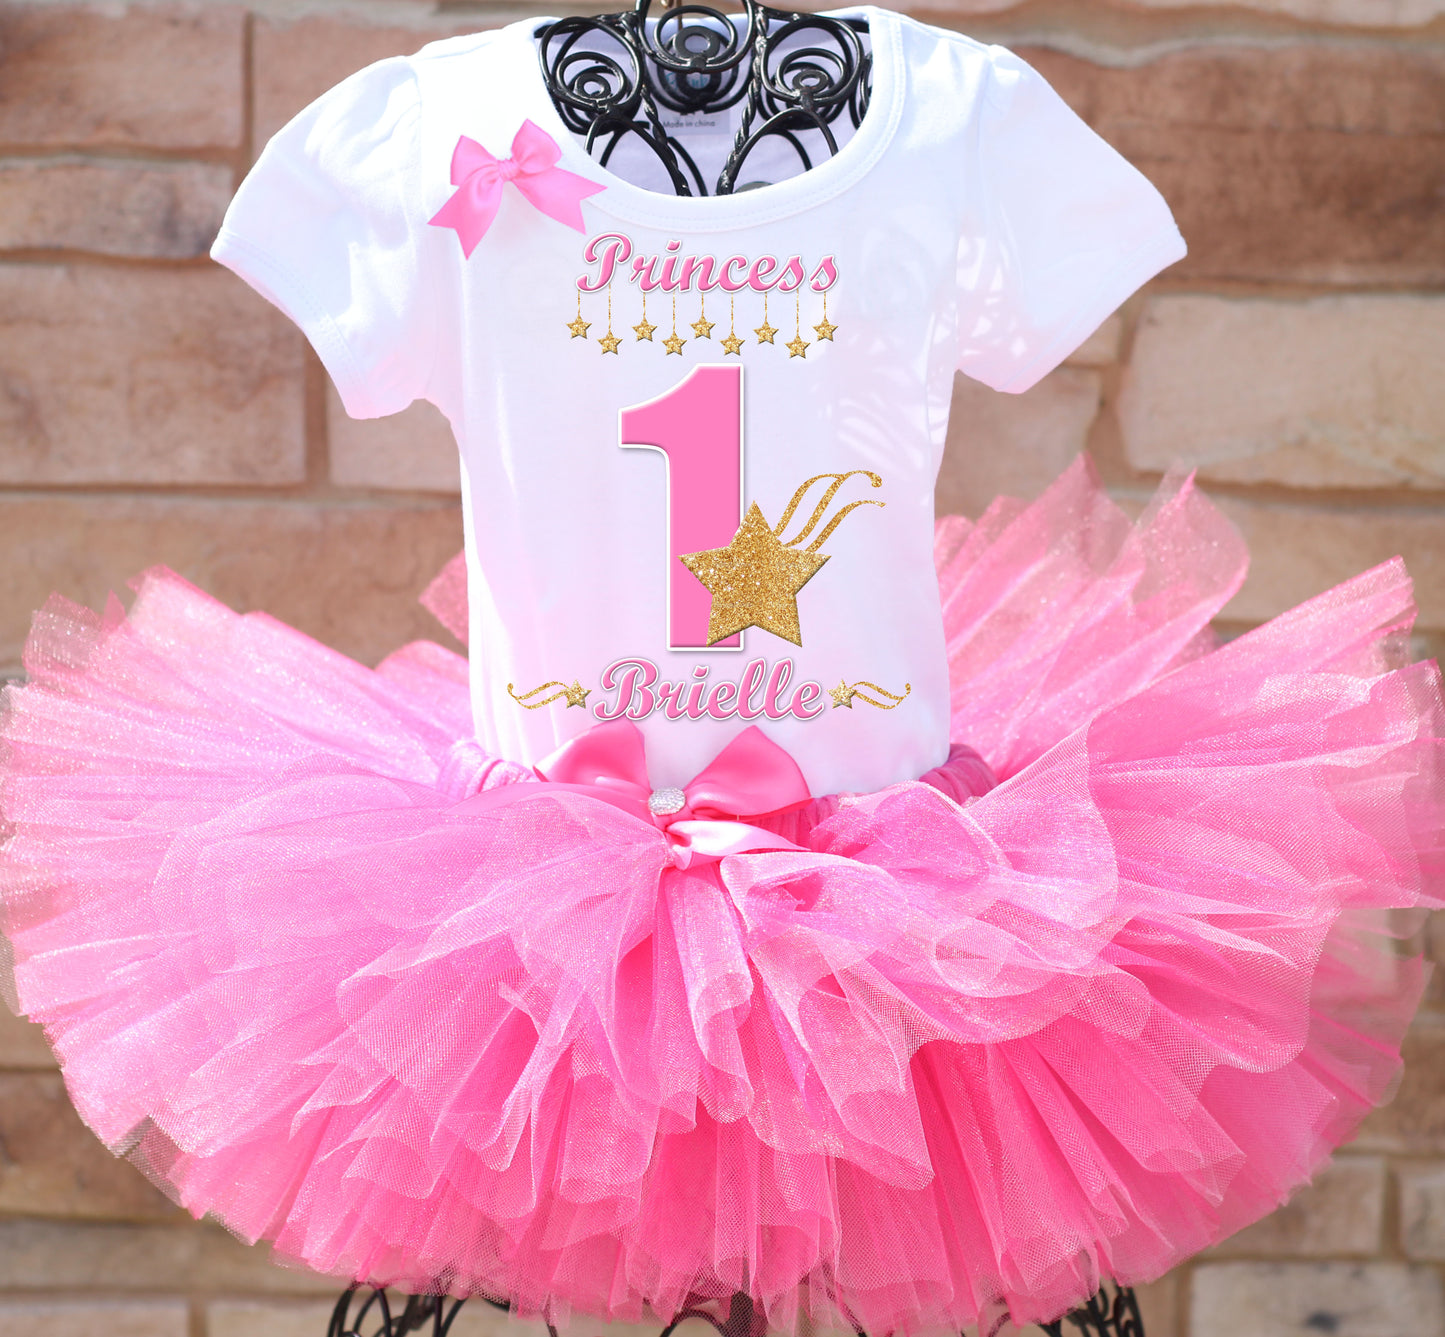 Twinkle Little Star birthday tutu outfit